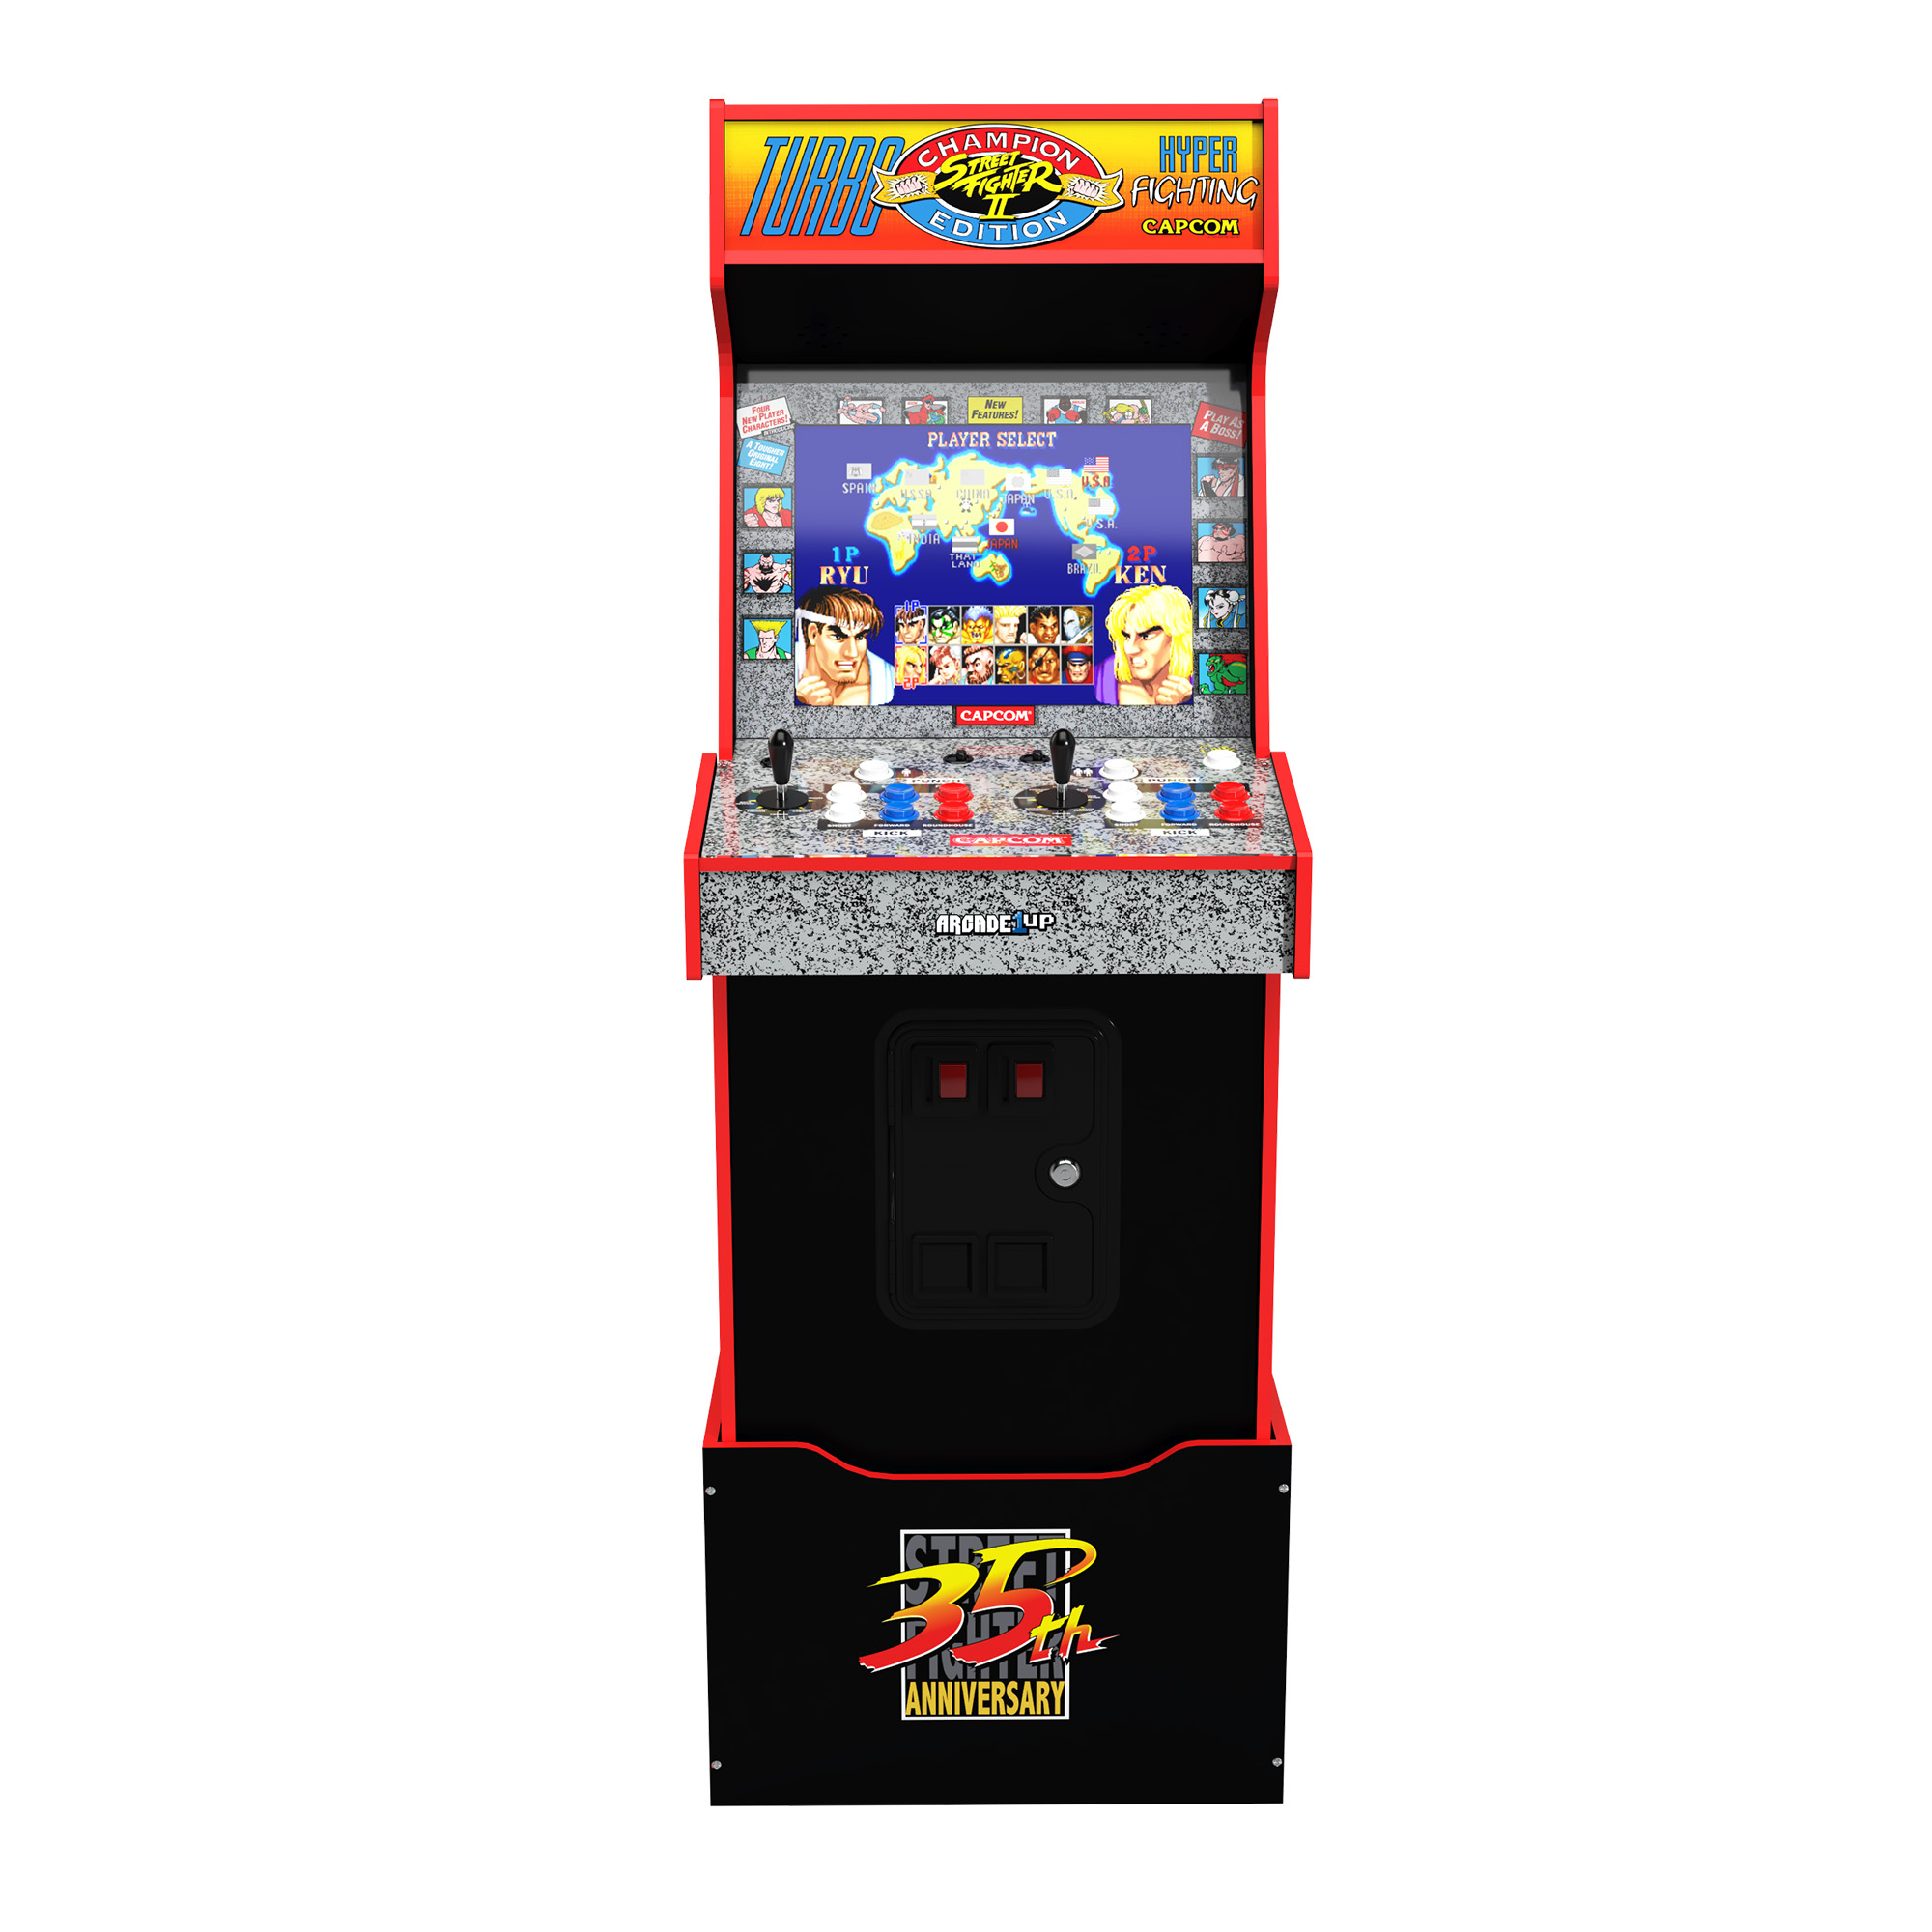 Arcade1UP - 14 Games in 1, Street Fighter II Turbo: Hyper Fighting, Legacy Video Game Arcade with Riser and Wi-Fi Live - image 4 of 7